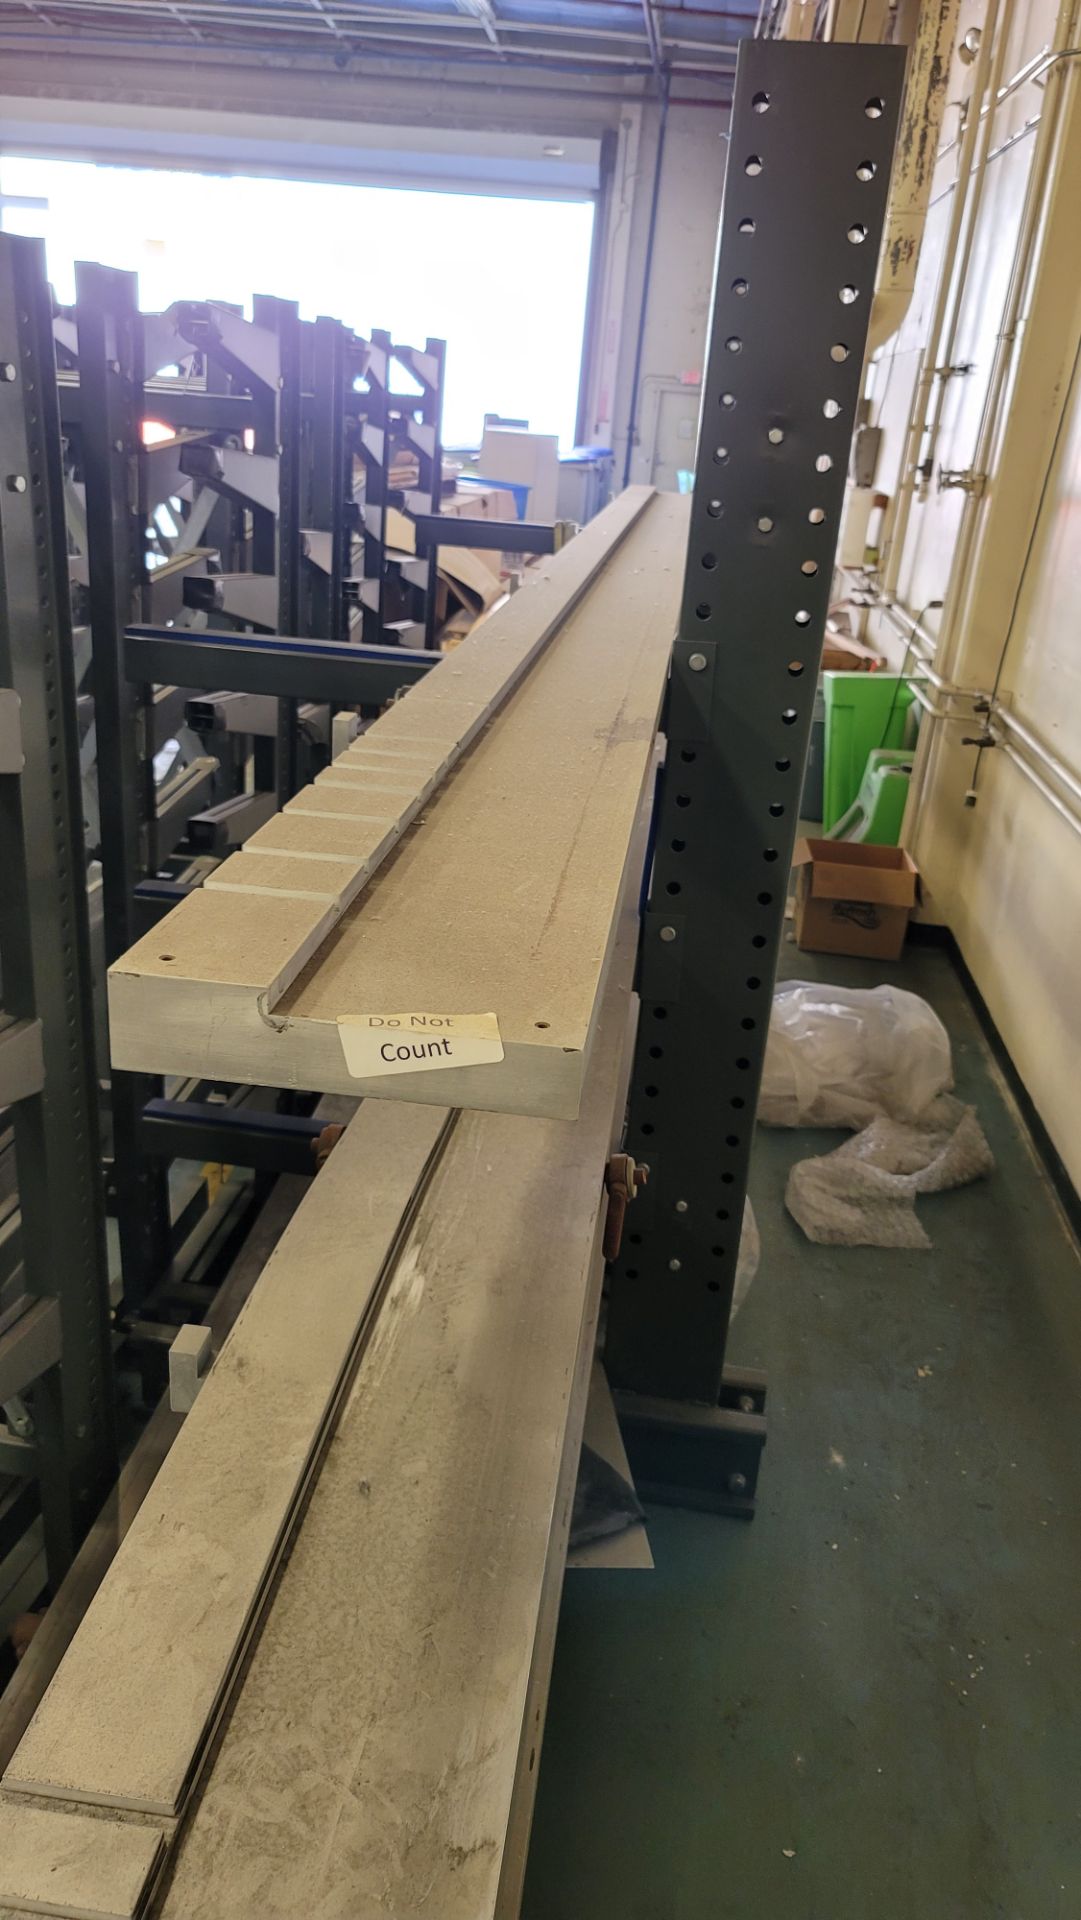 8' CANTILEVER MATERIAL RACK, 3' ARMS, 8' HT, CONTENTS NOT INCLUDED (LOCATION: BUILDING 15 MAIN) - Image 2 of 2